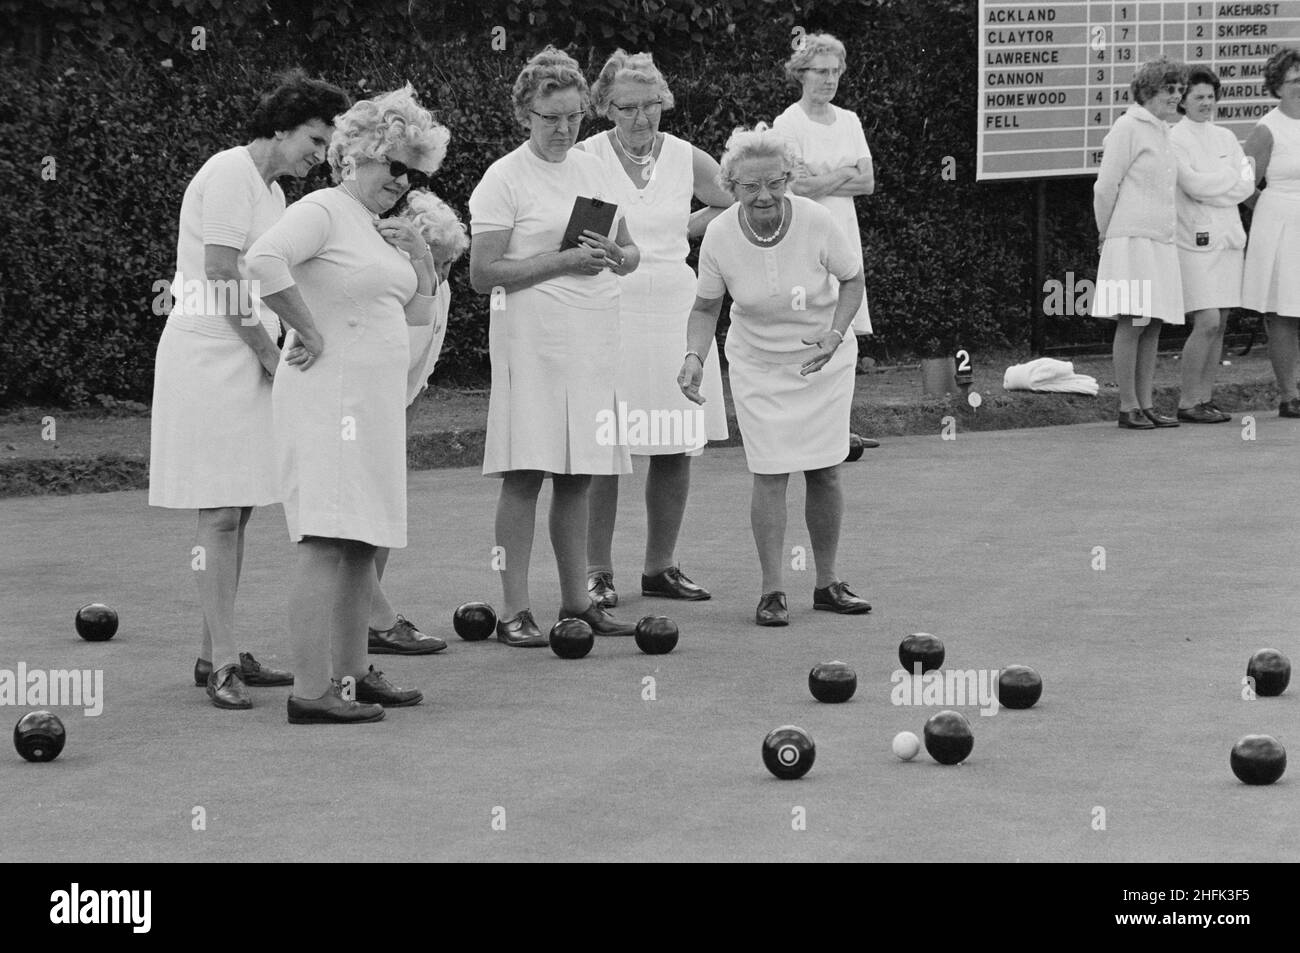 Laing Sports Ground, Rowley Lane, Elstree, Barnet, London, 21/07/1973. A group of women playing a game of bowls at Laing's Sports Ground. This photograph is part of a batch to show sports being played between members of Laing's Sports Club and staff from Blue Circle, the cement manufacturer. Stock Photo